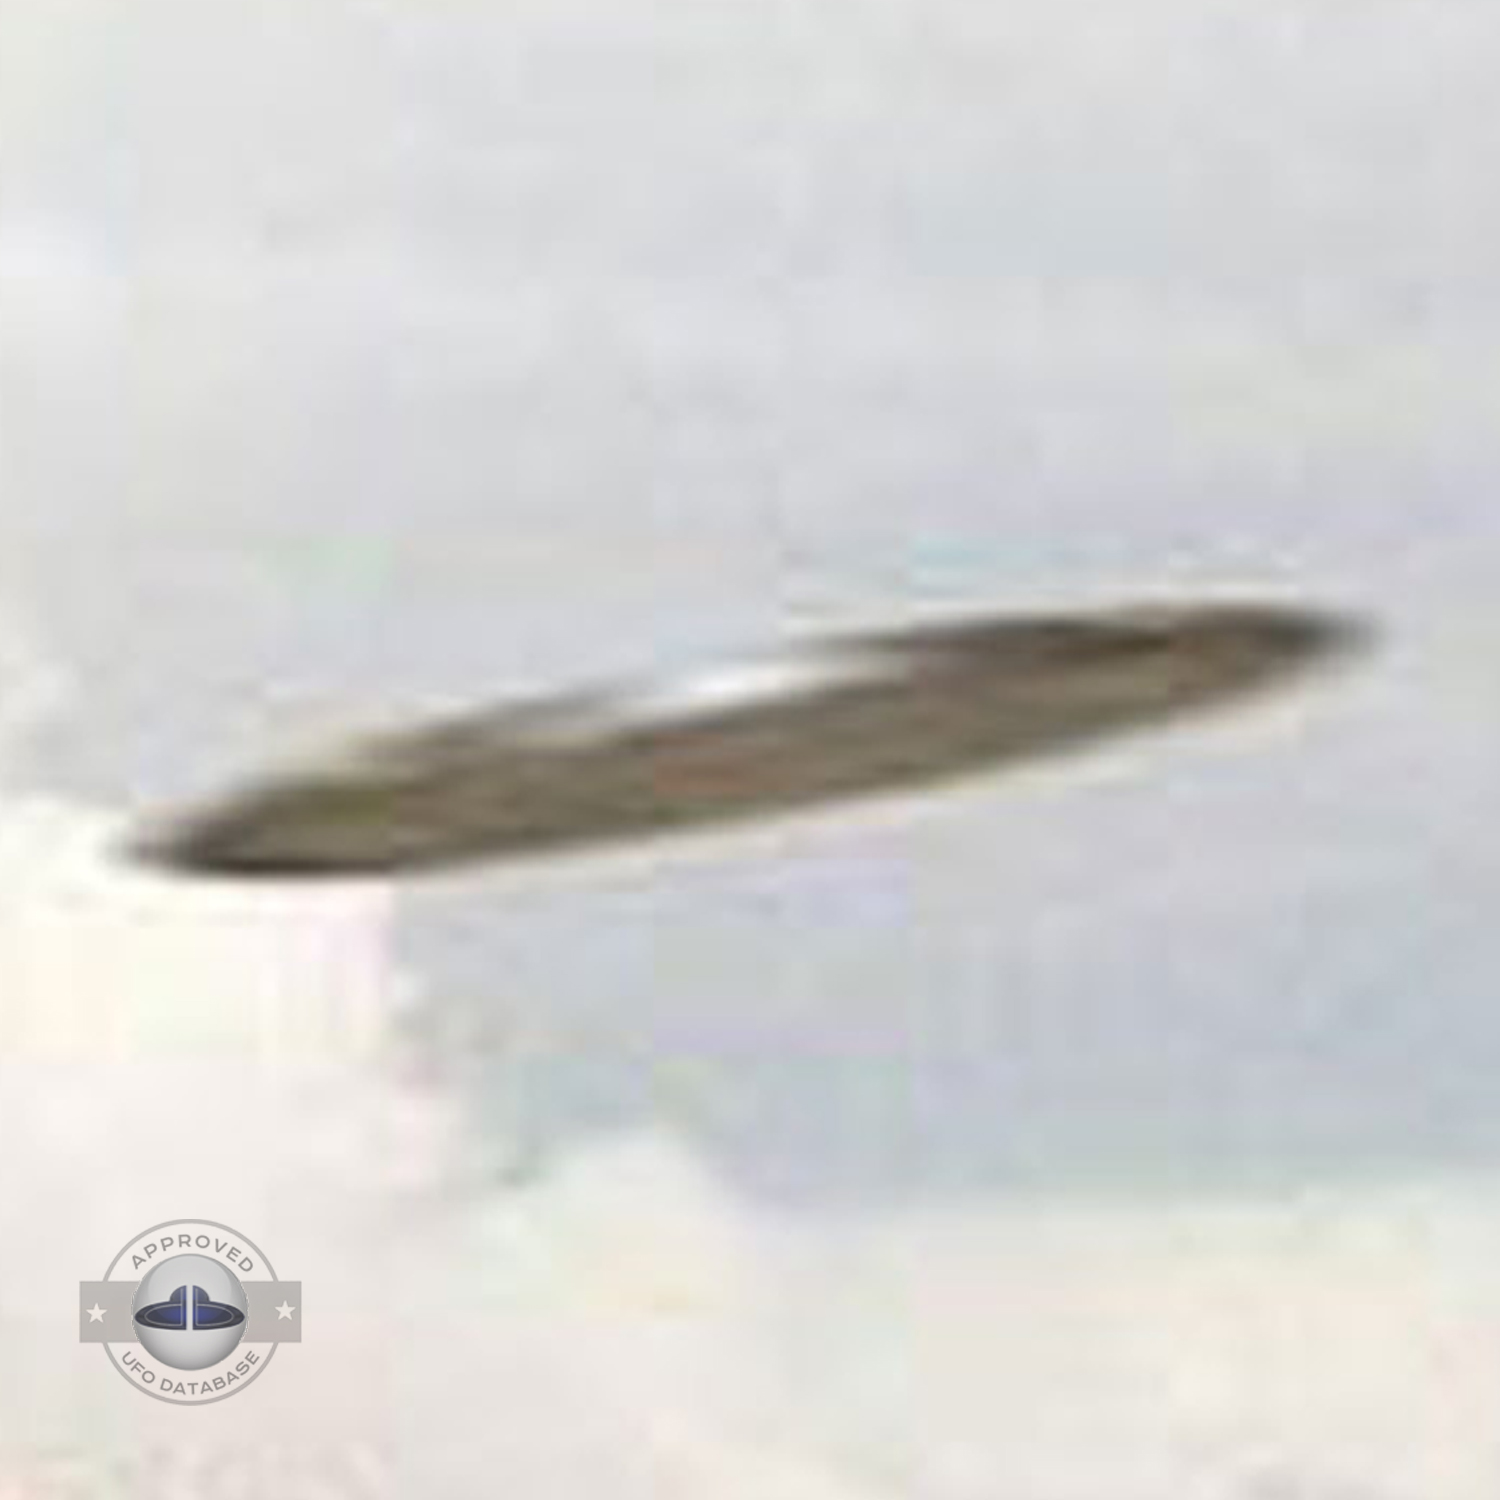 Clean UFO picture UFO disc flying over a lake in Kustavi Finland UFO Picture #56-4